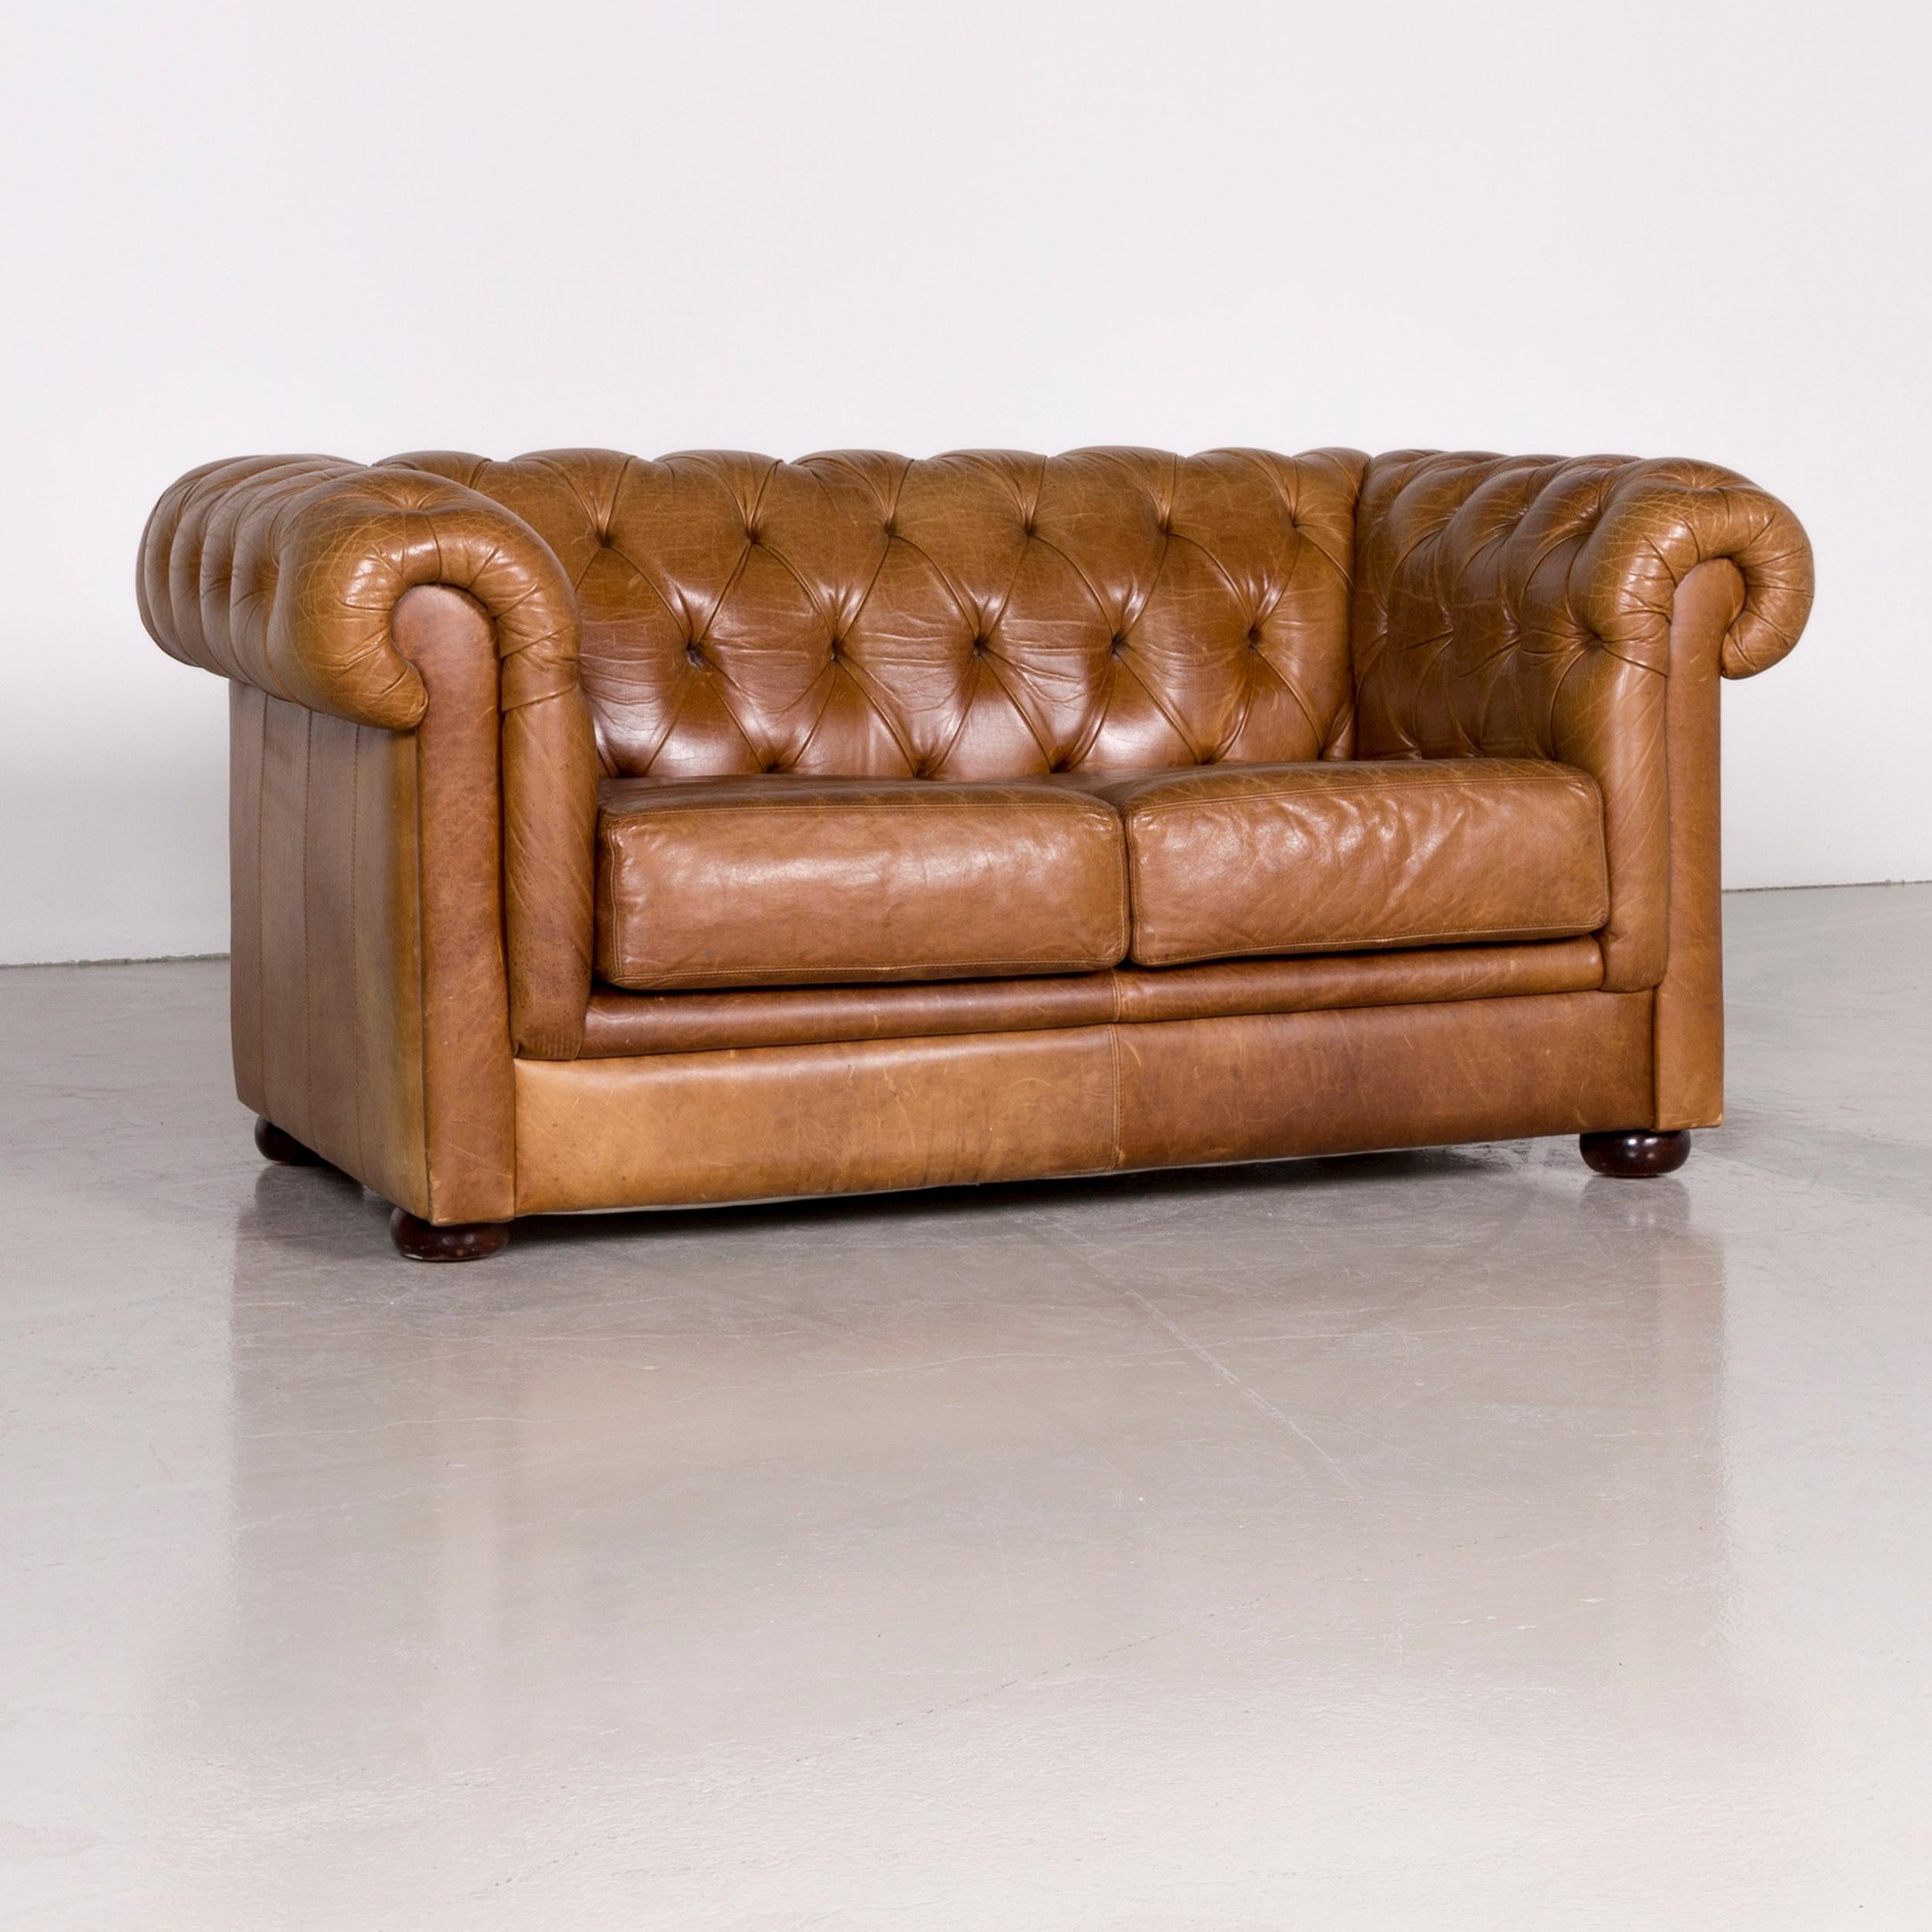 We bring to you a Chesterfield leather sofa brown vintage two-seat couch.